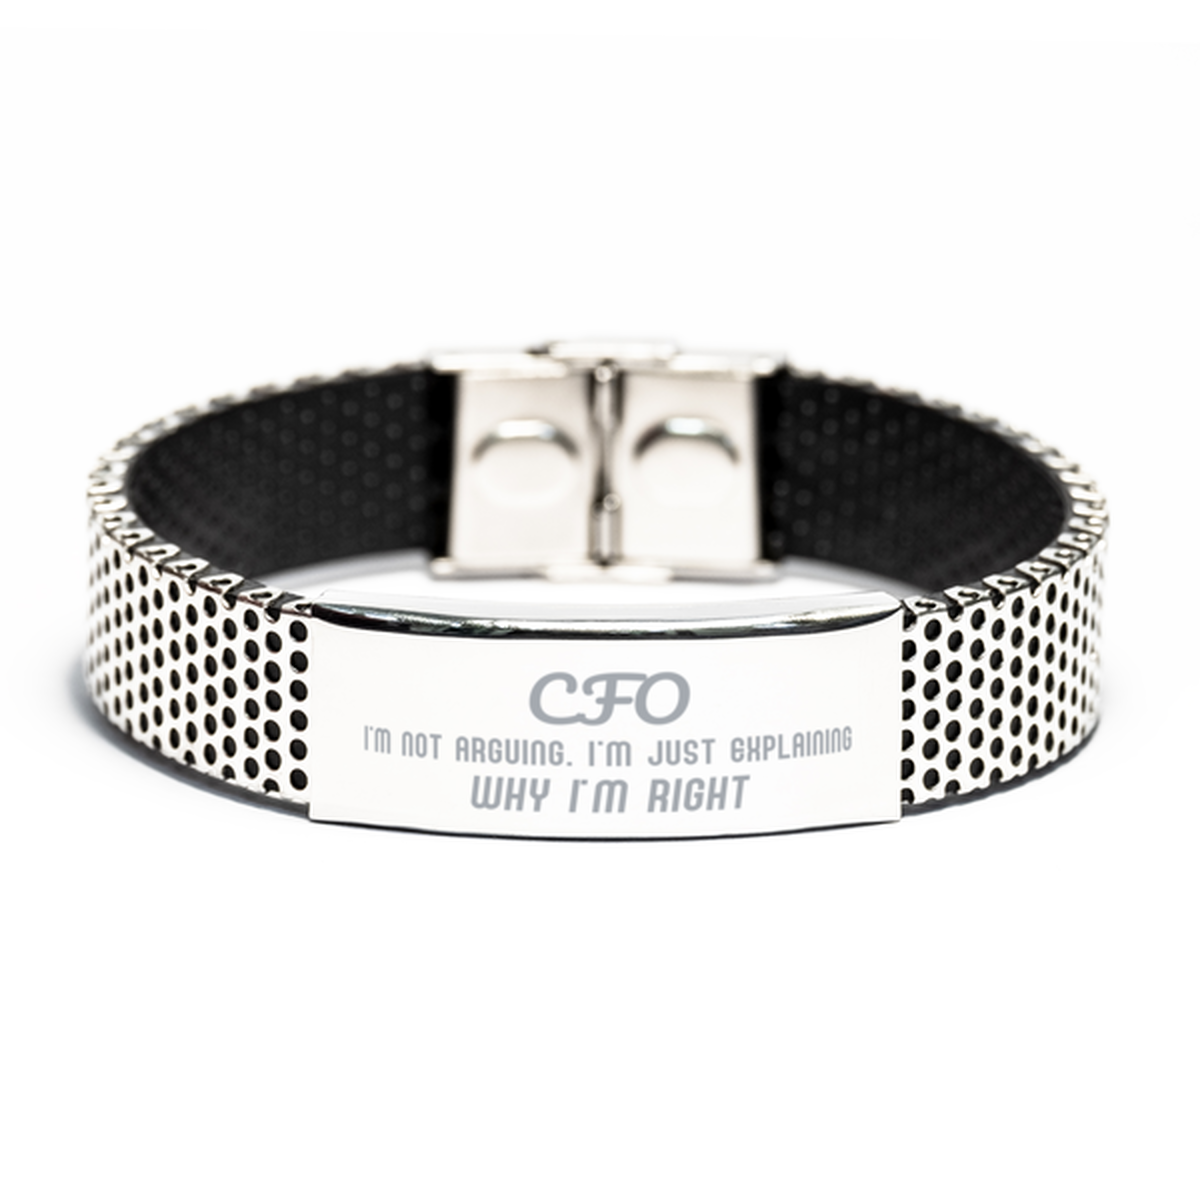 CFO I'm not Arguing. I'm Just Explaining Why I'm RIGHT Stainless Steel Bracelet, Funny Saying Quote CFO Gifts For CFO Graduation Birthday Christmas Gifts for Men Women Coworker